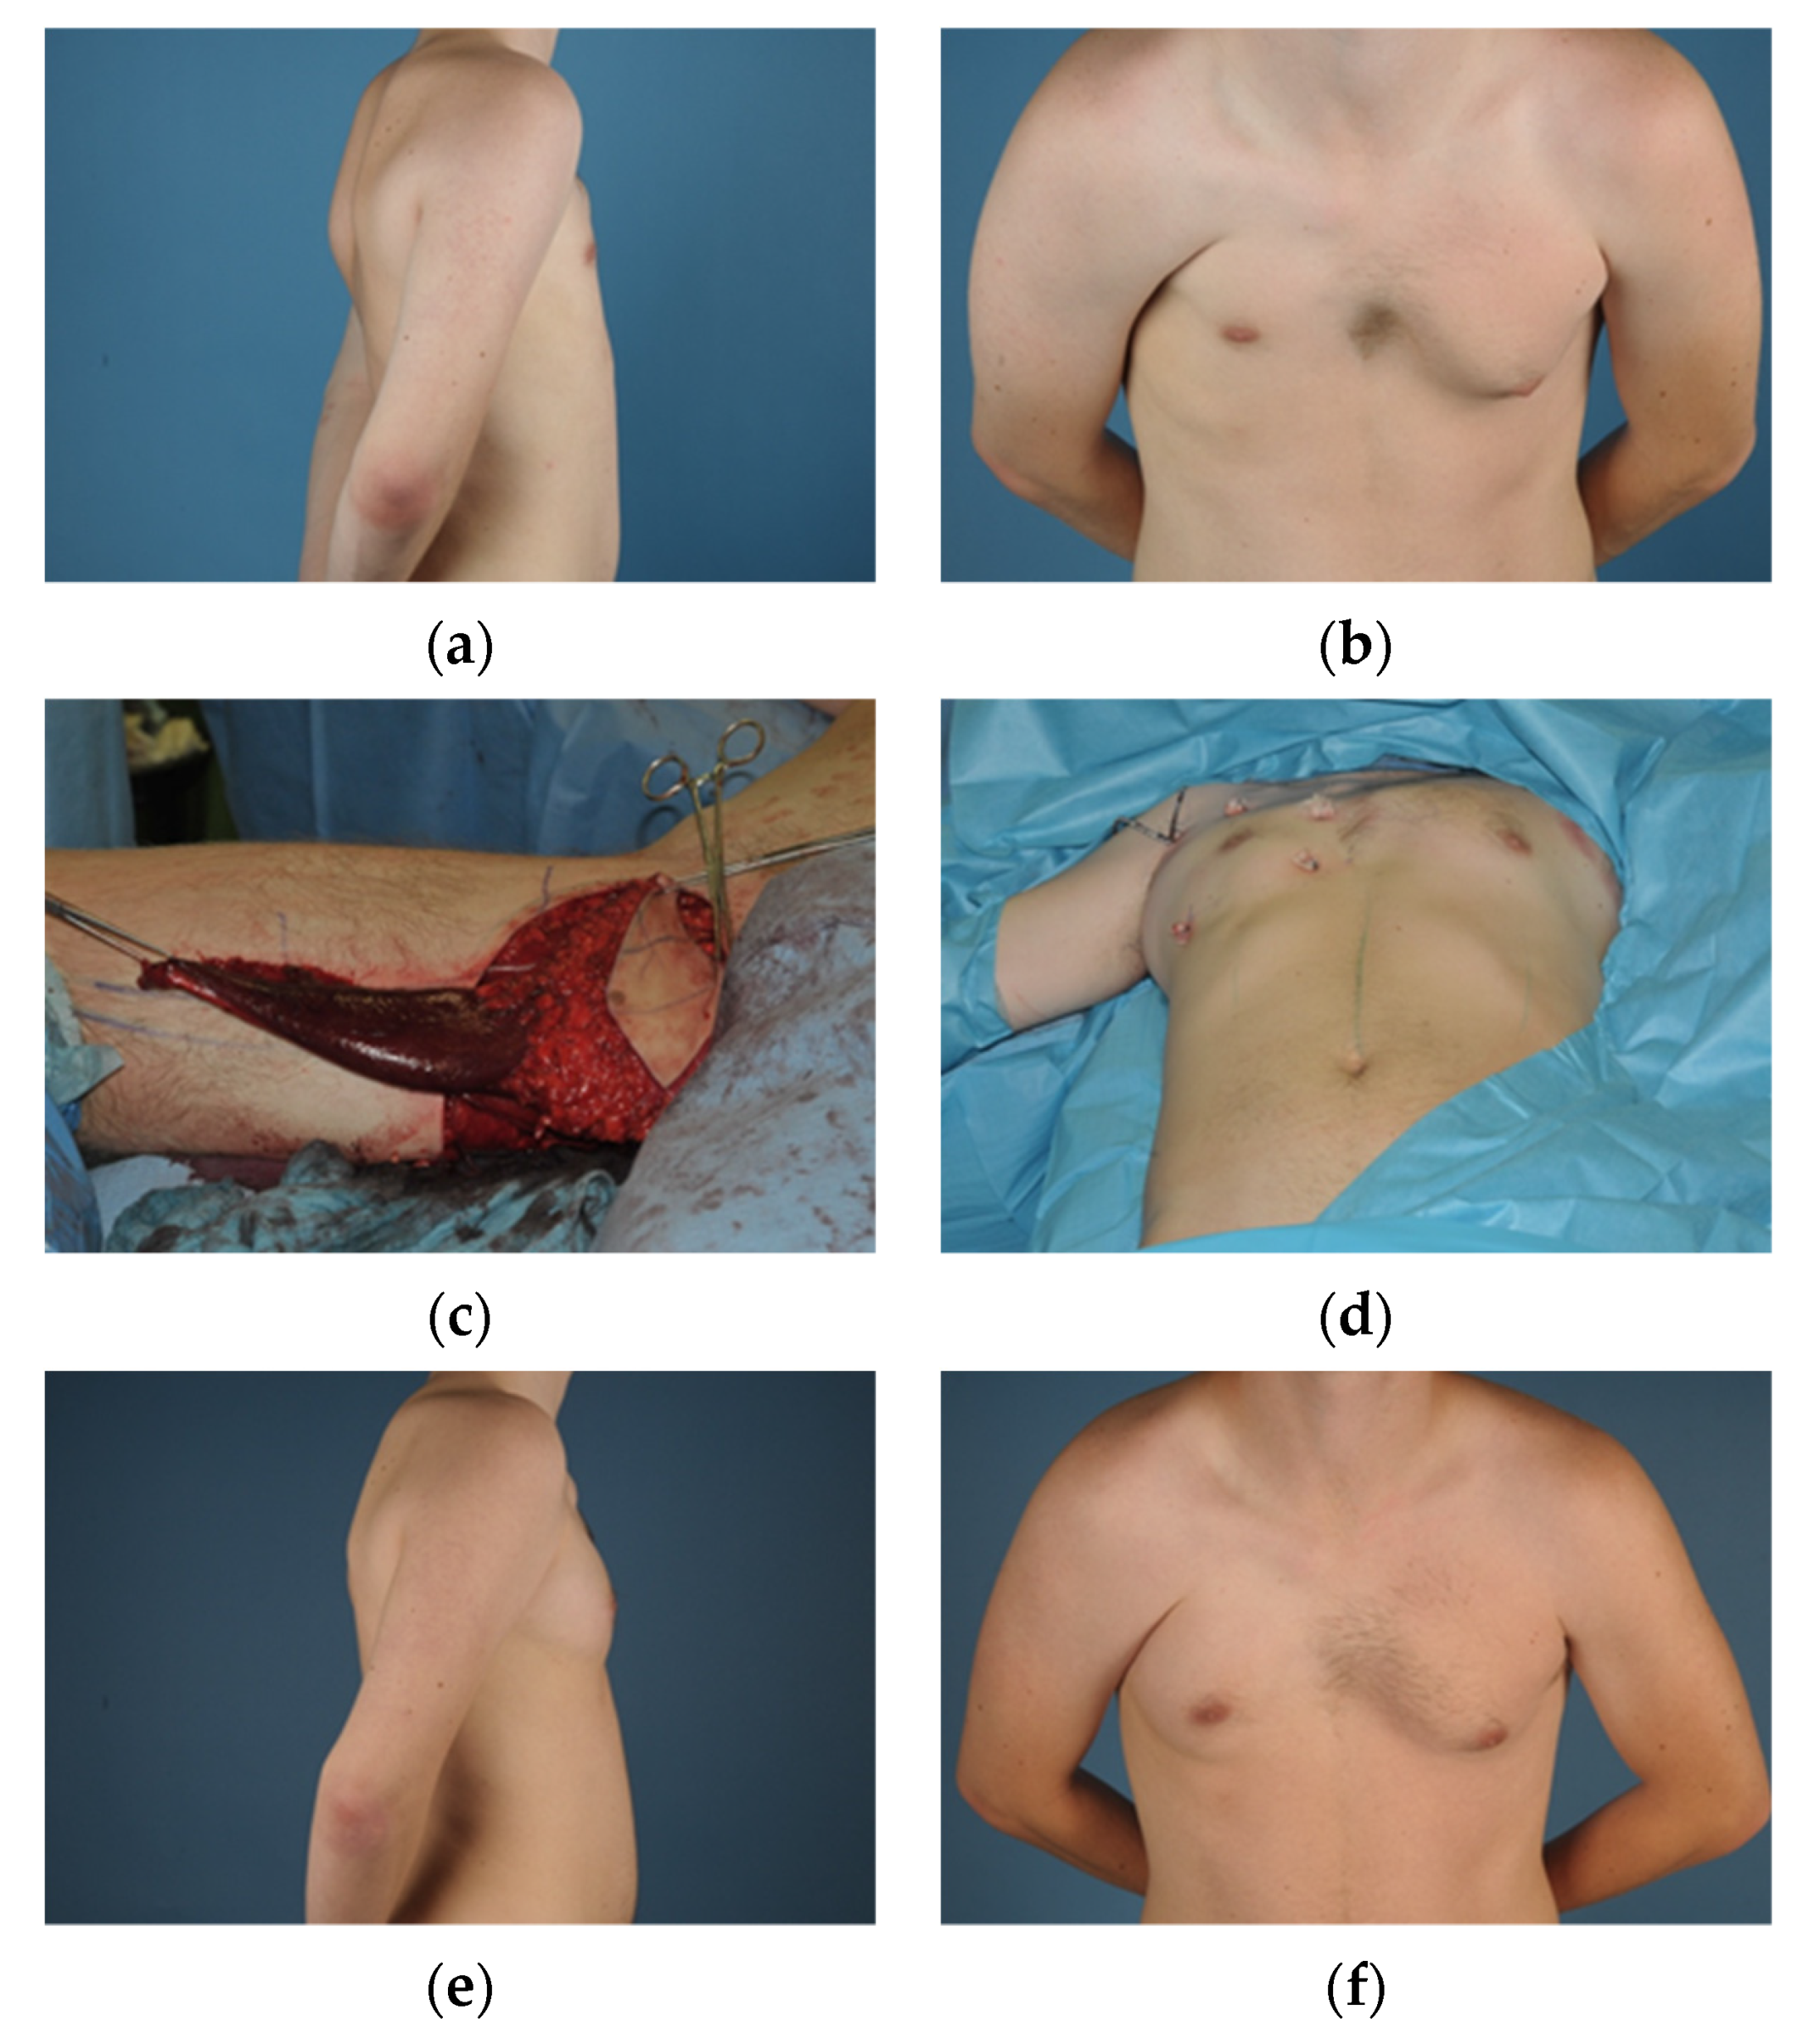 Surgical Therapy: Chest Wall Contouring for Female-to-Male